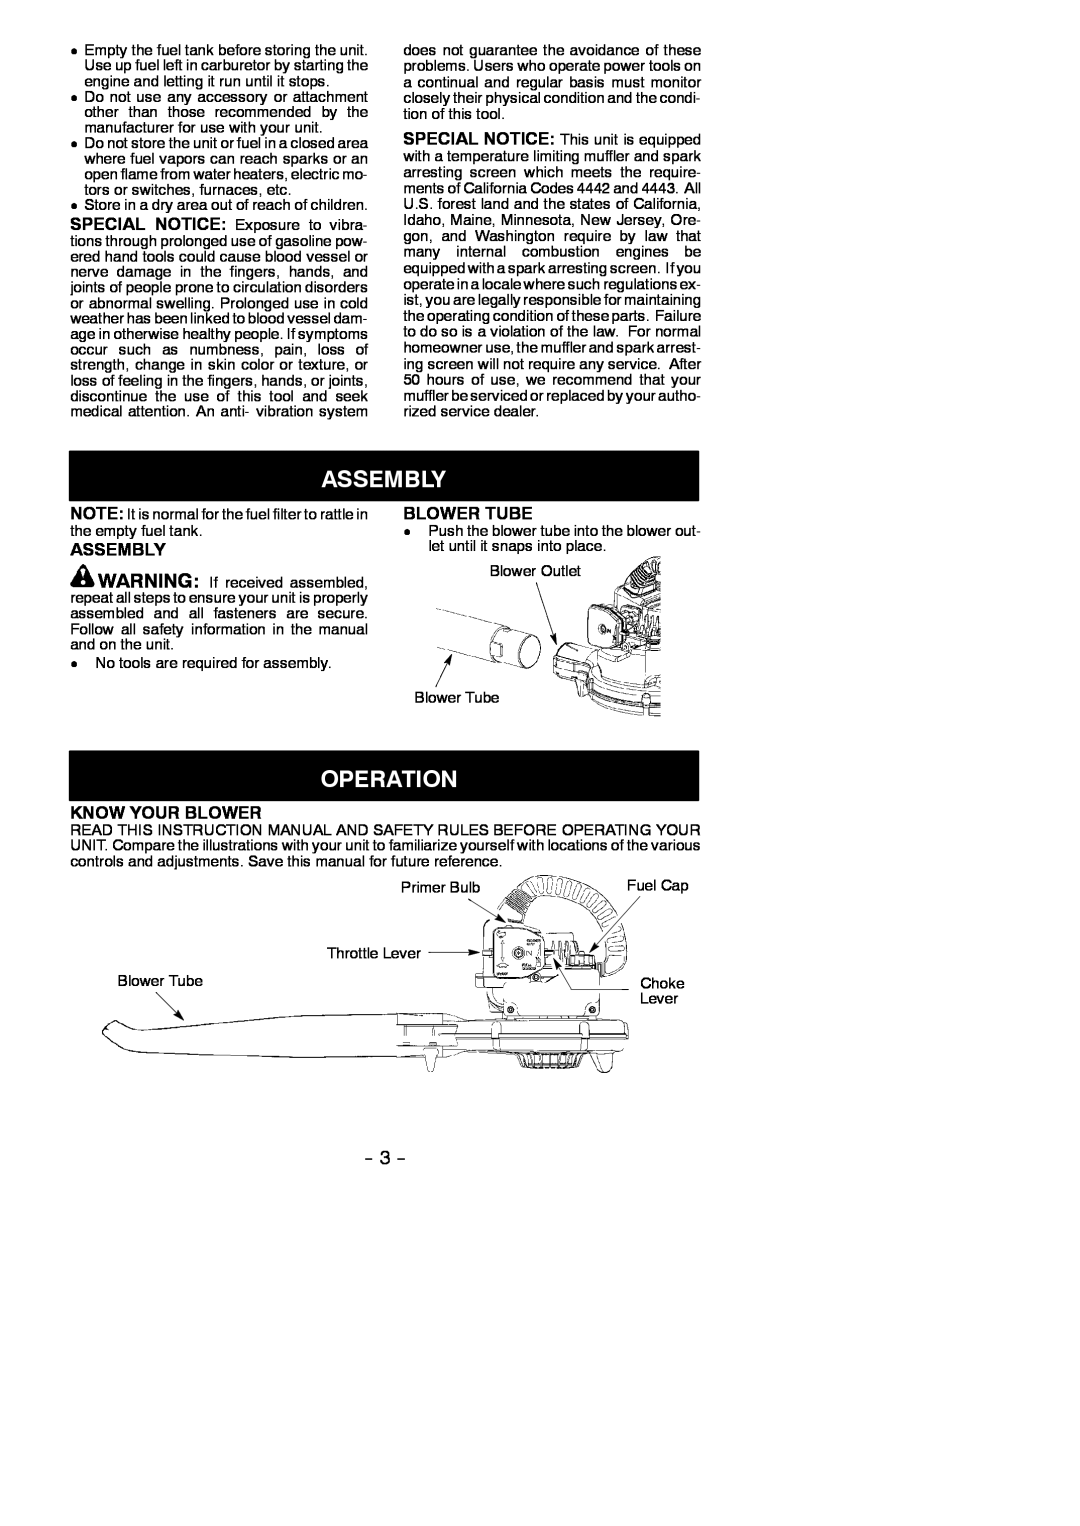 Weed Eater 545137215 instruction manual Assembly, Operation, Blower Tube, Know Your Blower 